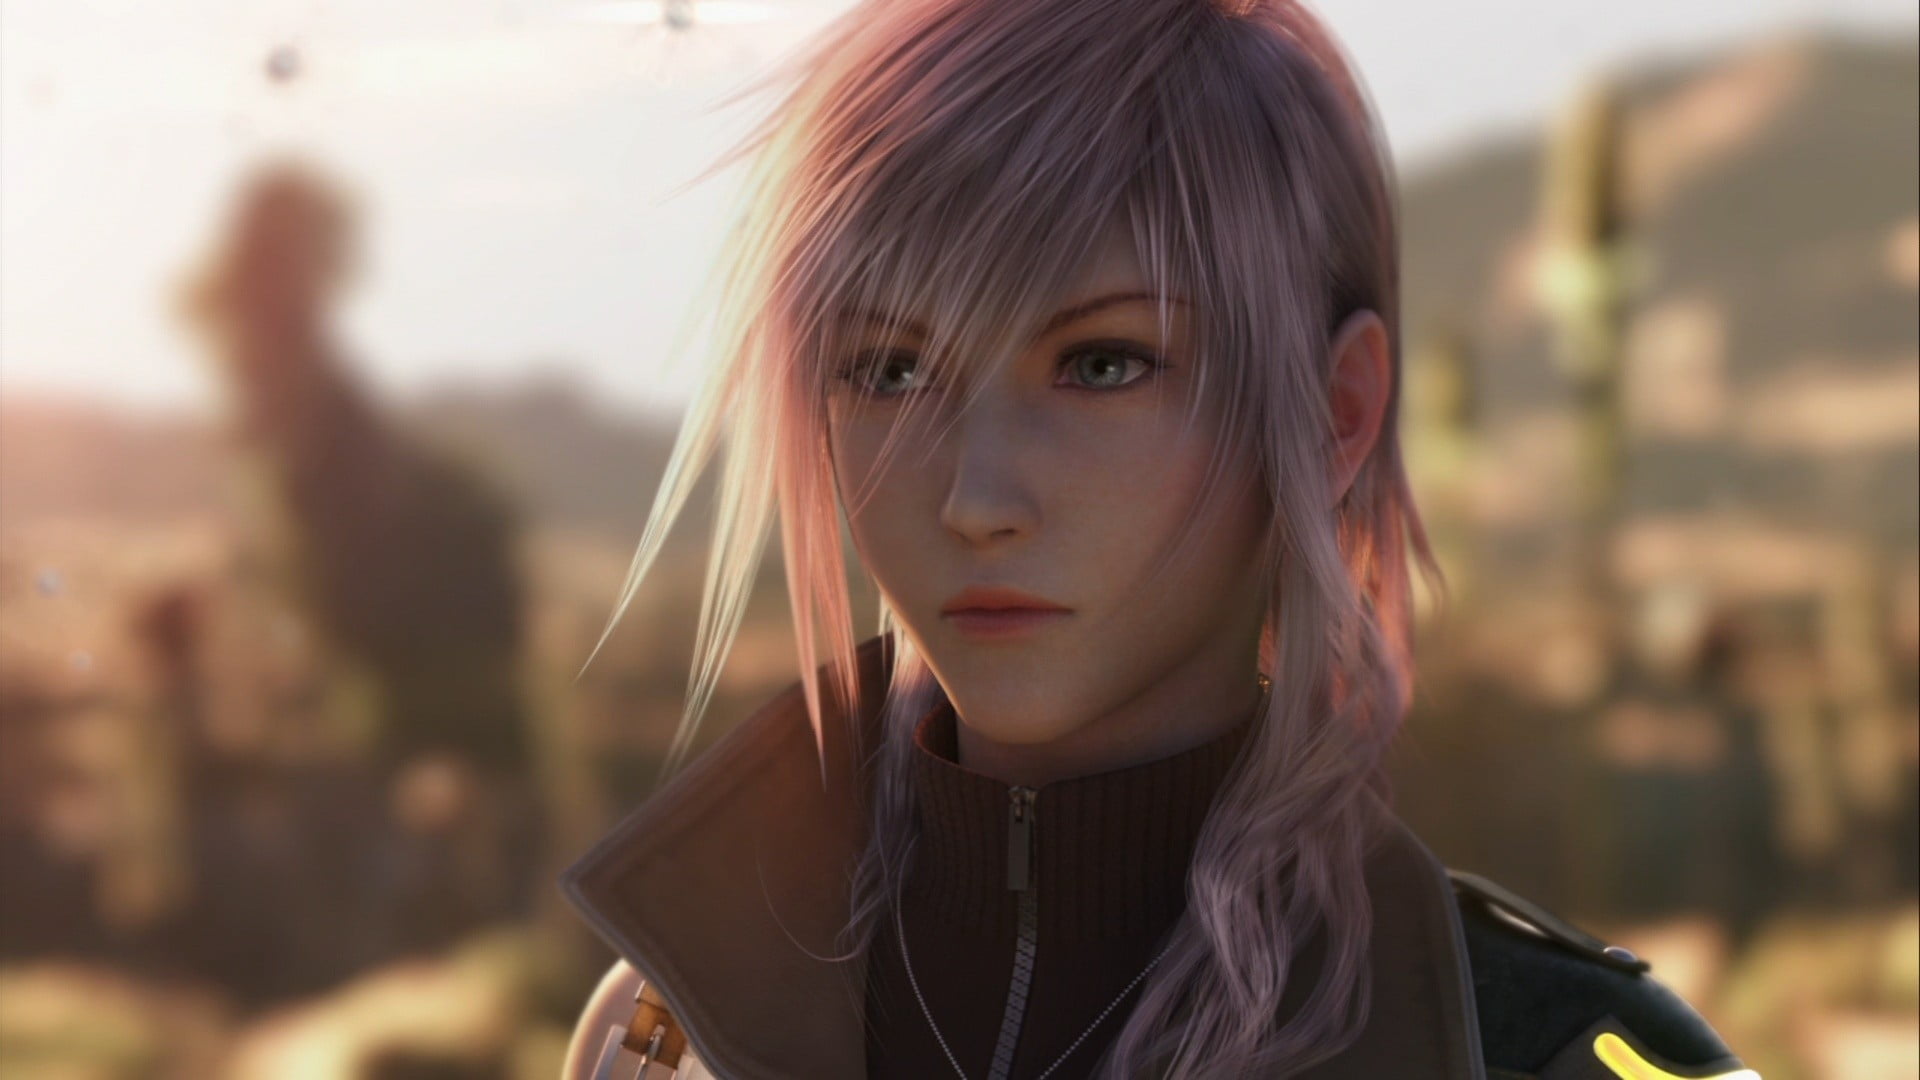 1536x864 Resolution Final Fantasy Female Character Claire Farron Final Fantasy Xiii Video 